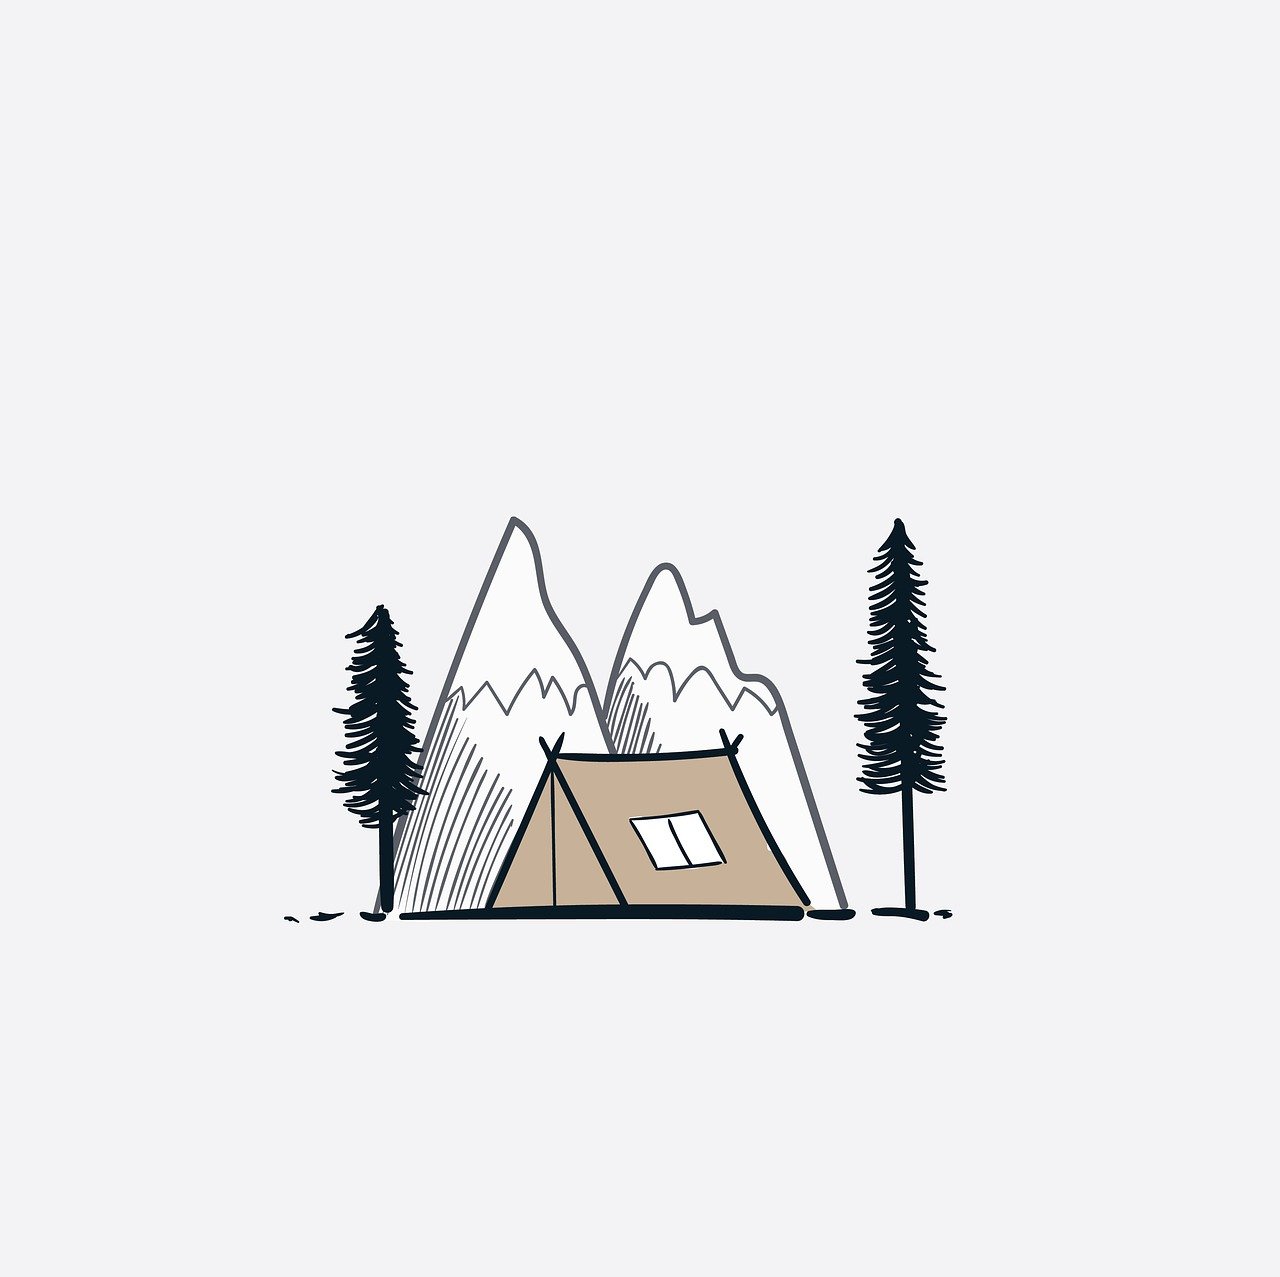 a drawing of a tent with mountains in the background, a picture, minimalism, with trees, vacation photo, on simple background, camps in the background